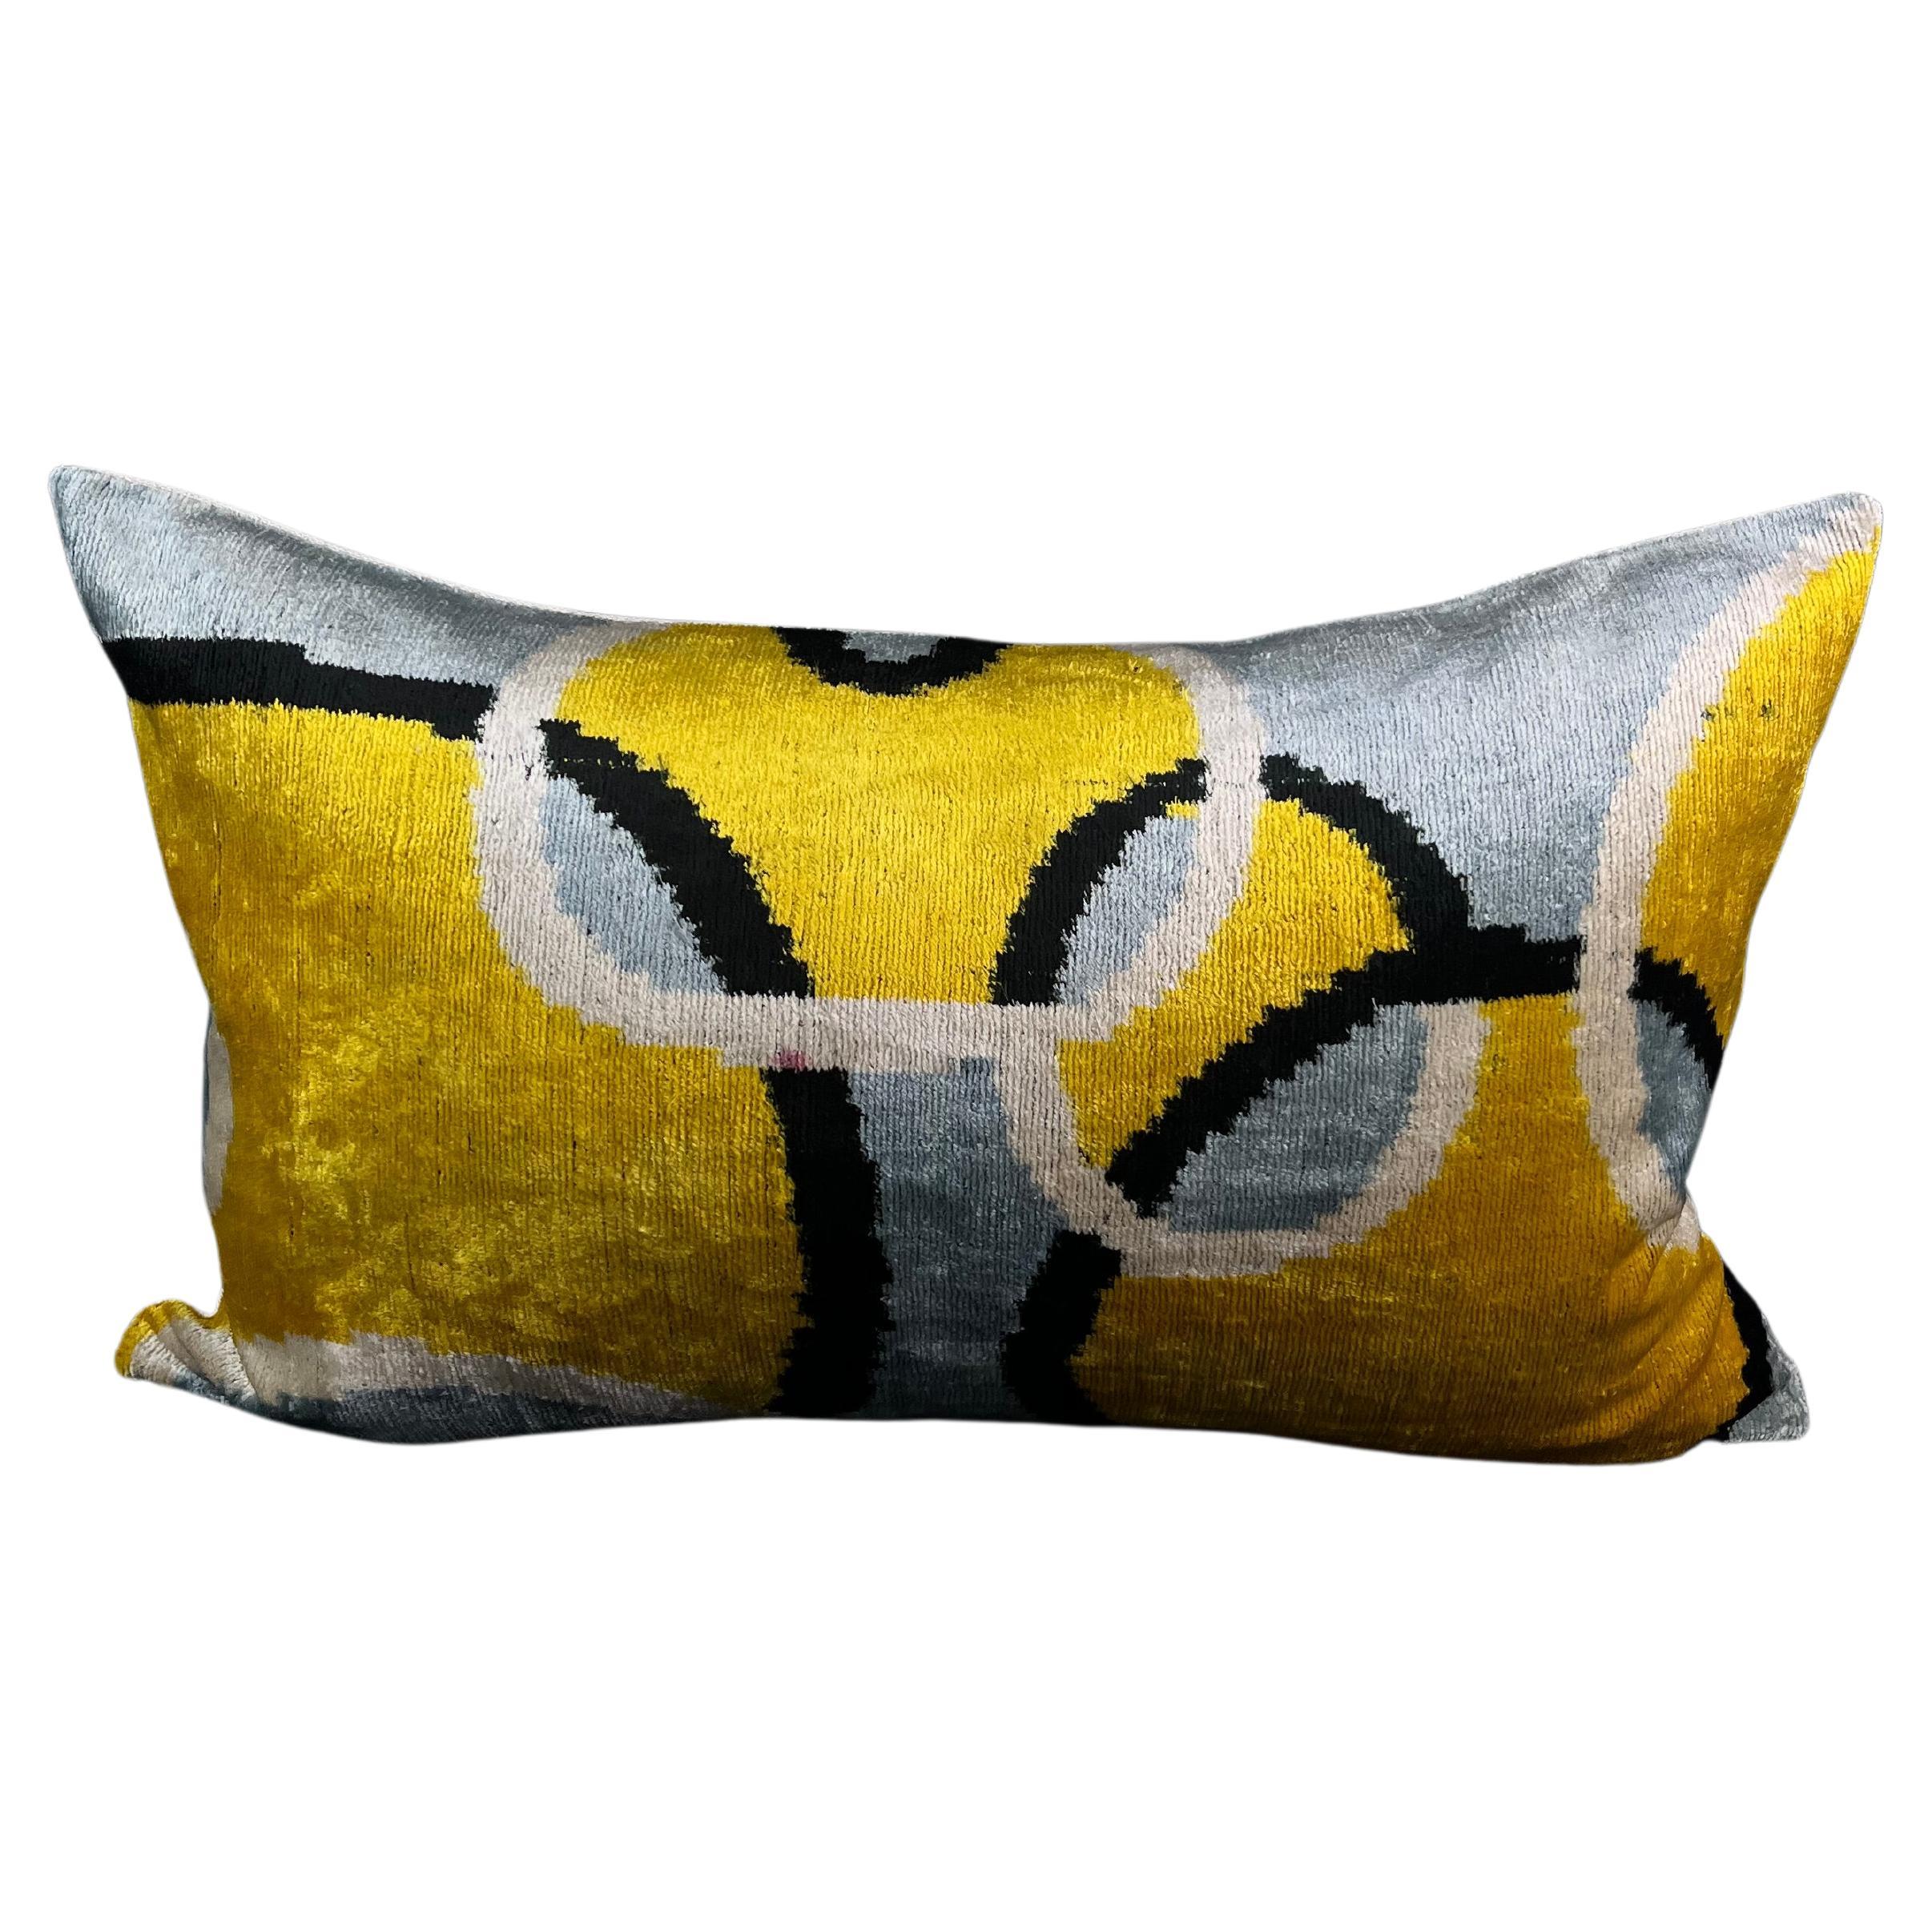 Gray and Yellow Geometric Circle Design Velvet Silk Ikat Pillow Cover For Sale